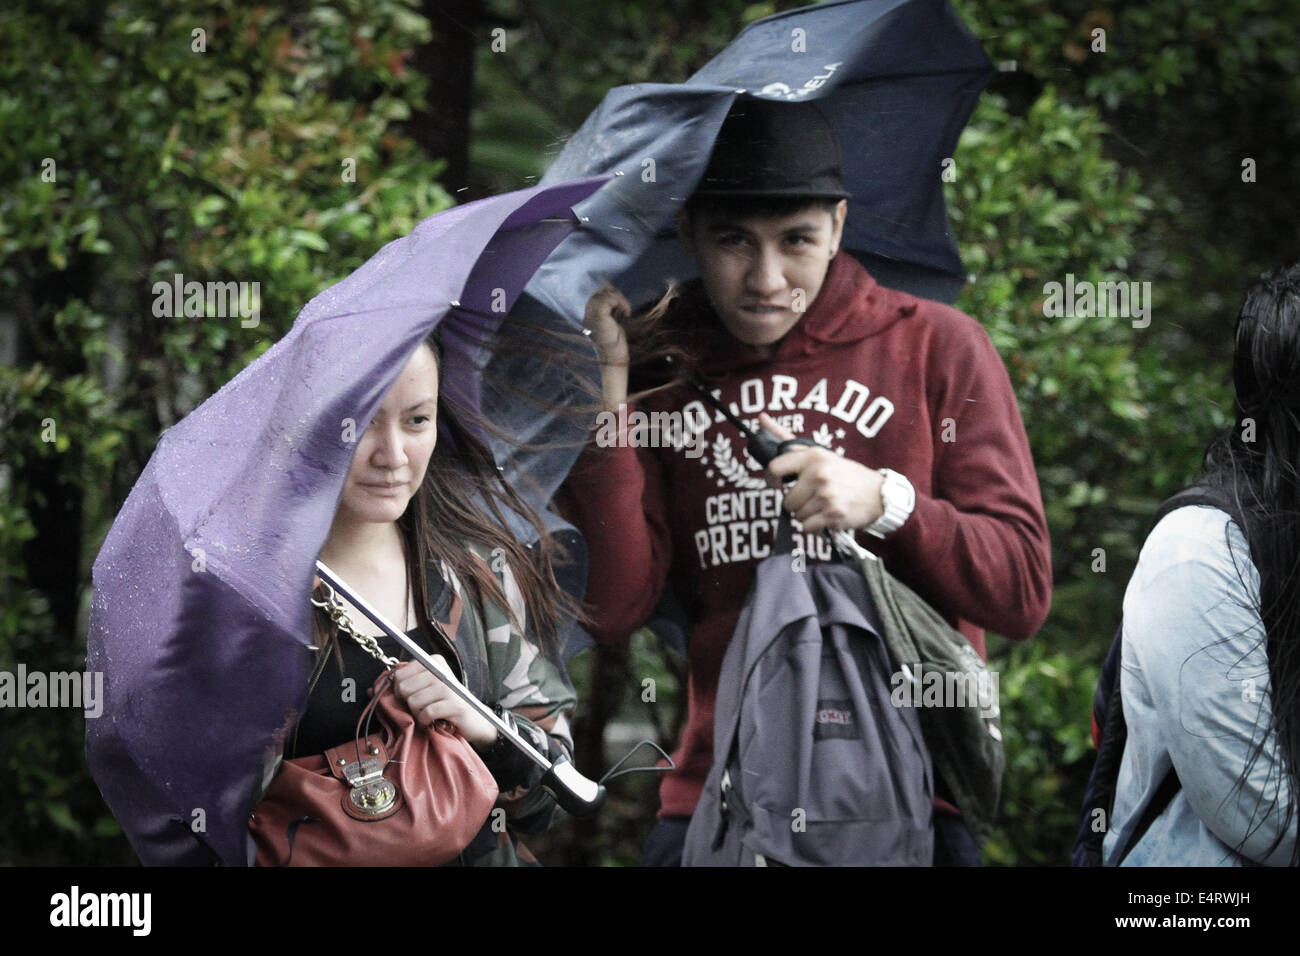 Manila, Philippines. 16th July, 2014. Commuters hold on to their umbrellas as Typhoon Rammasun hit Metro Manila on July 16, 2014. Typhoon Rammasun (locally known as Glenda) had maximum sustained winds of 150 kph and gustiness of up to 185 kph when it hit Metro Manila. Across the country, about 400,000 people had fled their homes and sheltered in evacuation centers, according to the disaster management council. Credit:  ZUMA Press, Inc./Alamy Live News Stock Photo